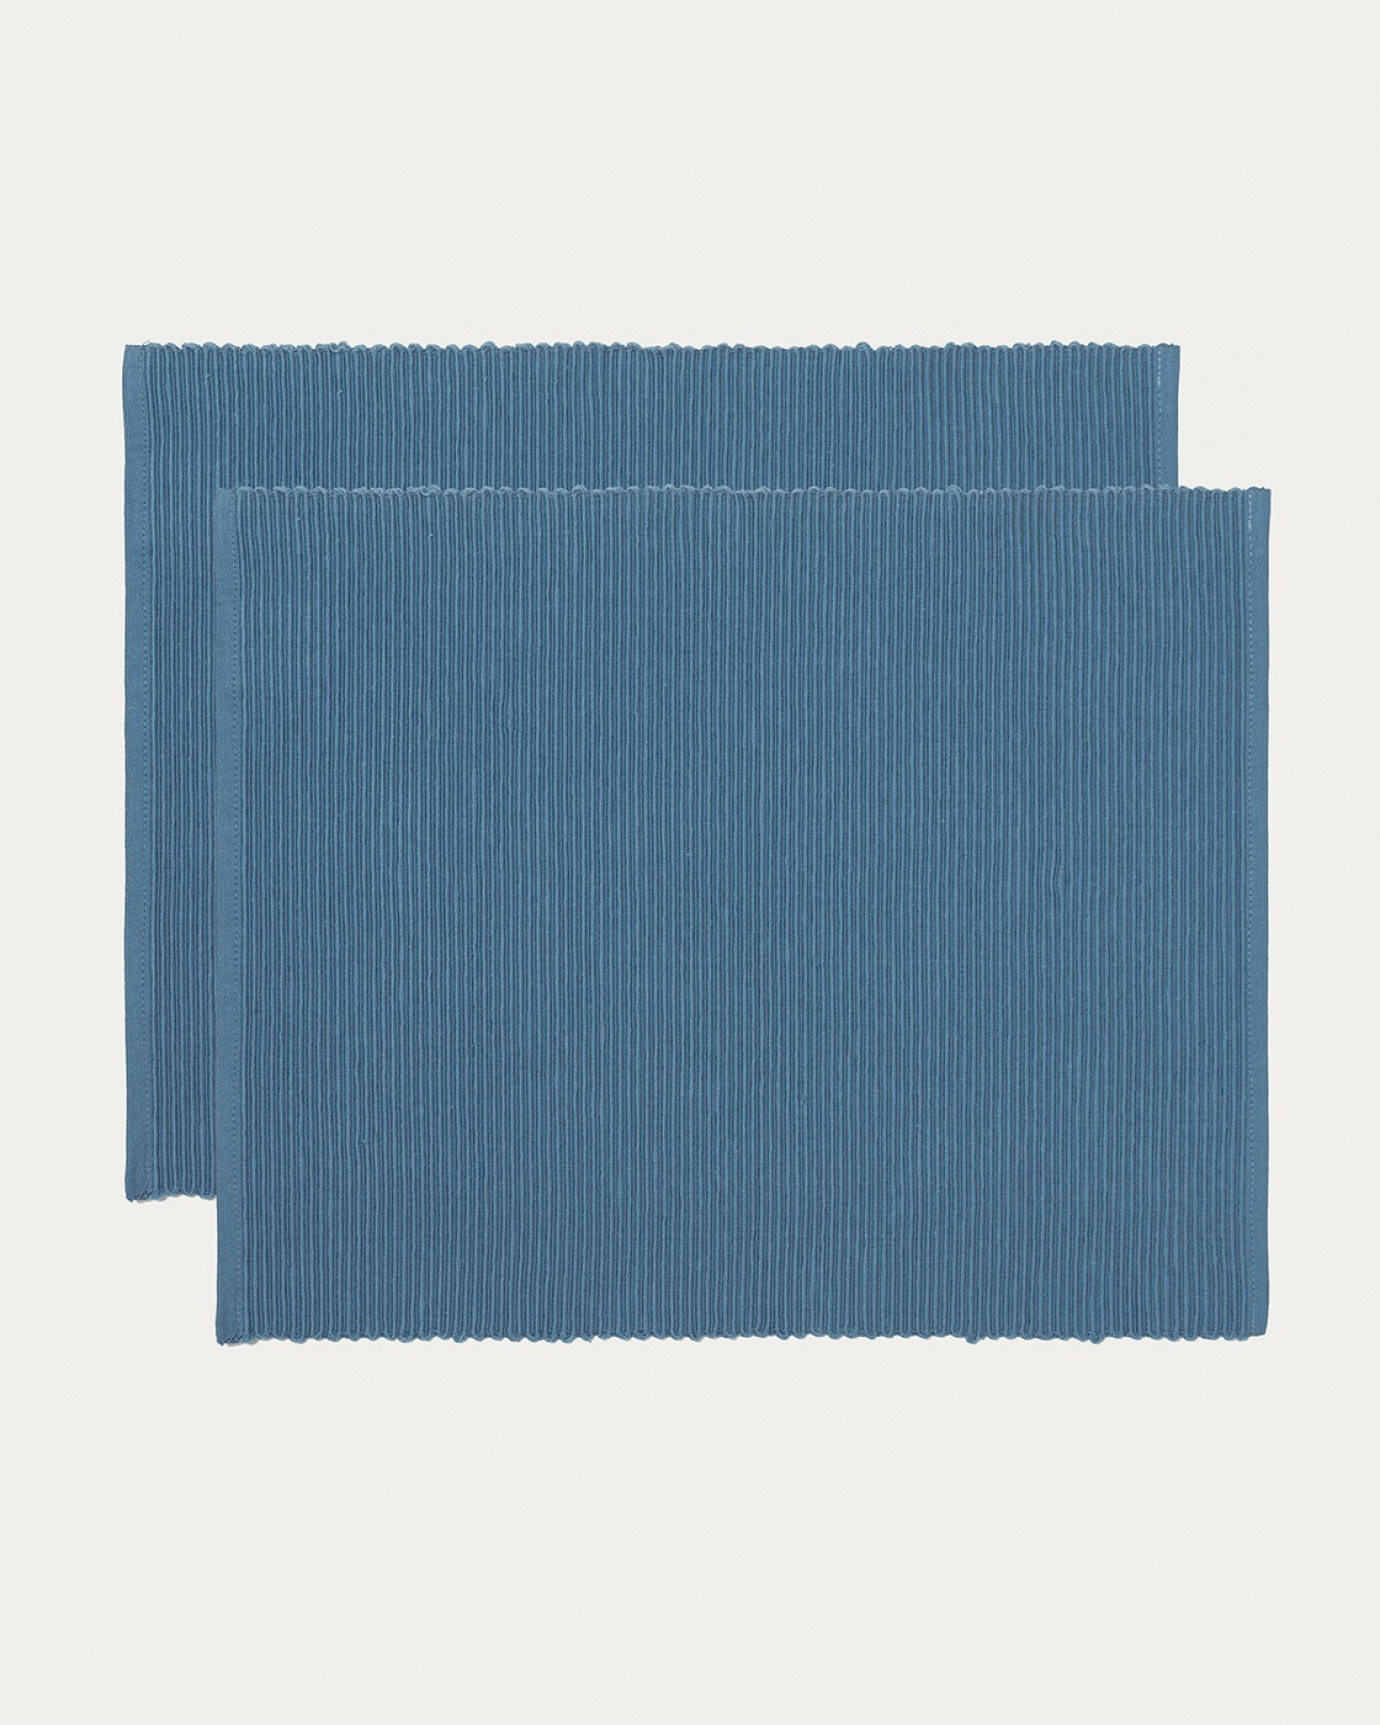 Product image deep sea blue UNI placemat made of soft cotton in ribbed quality from LINUM DESIGN. Size 35x46 cm and sold in 2-pack.